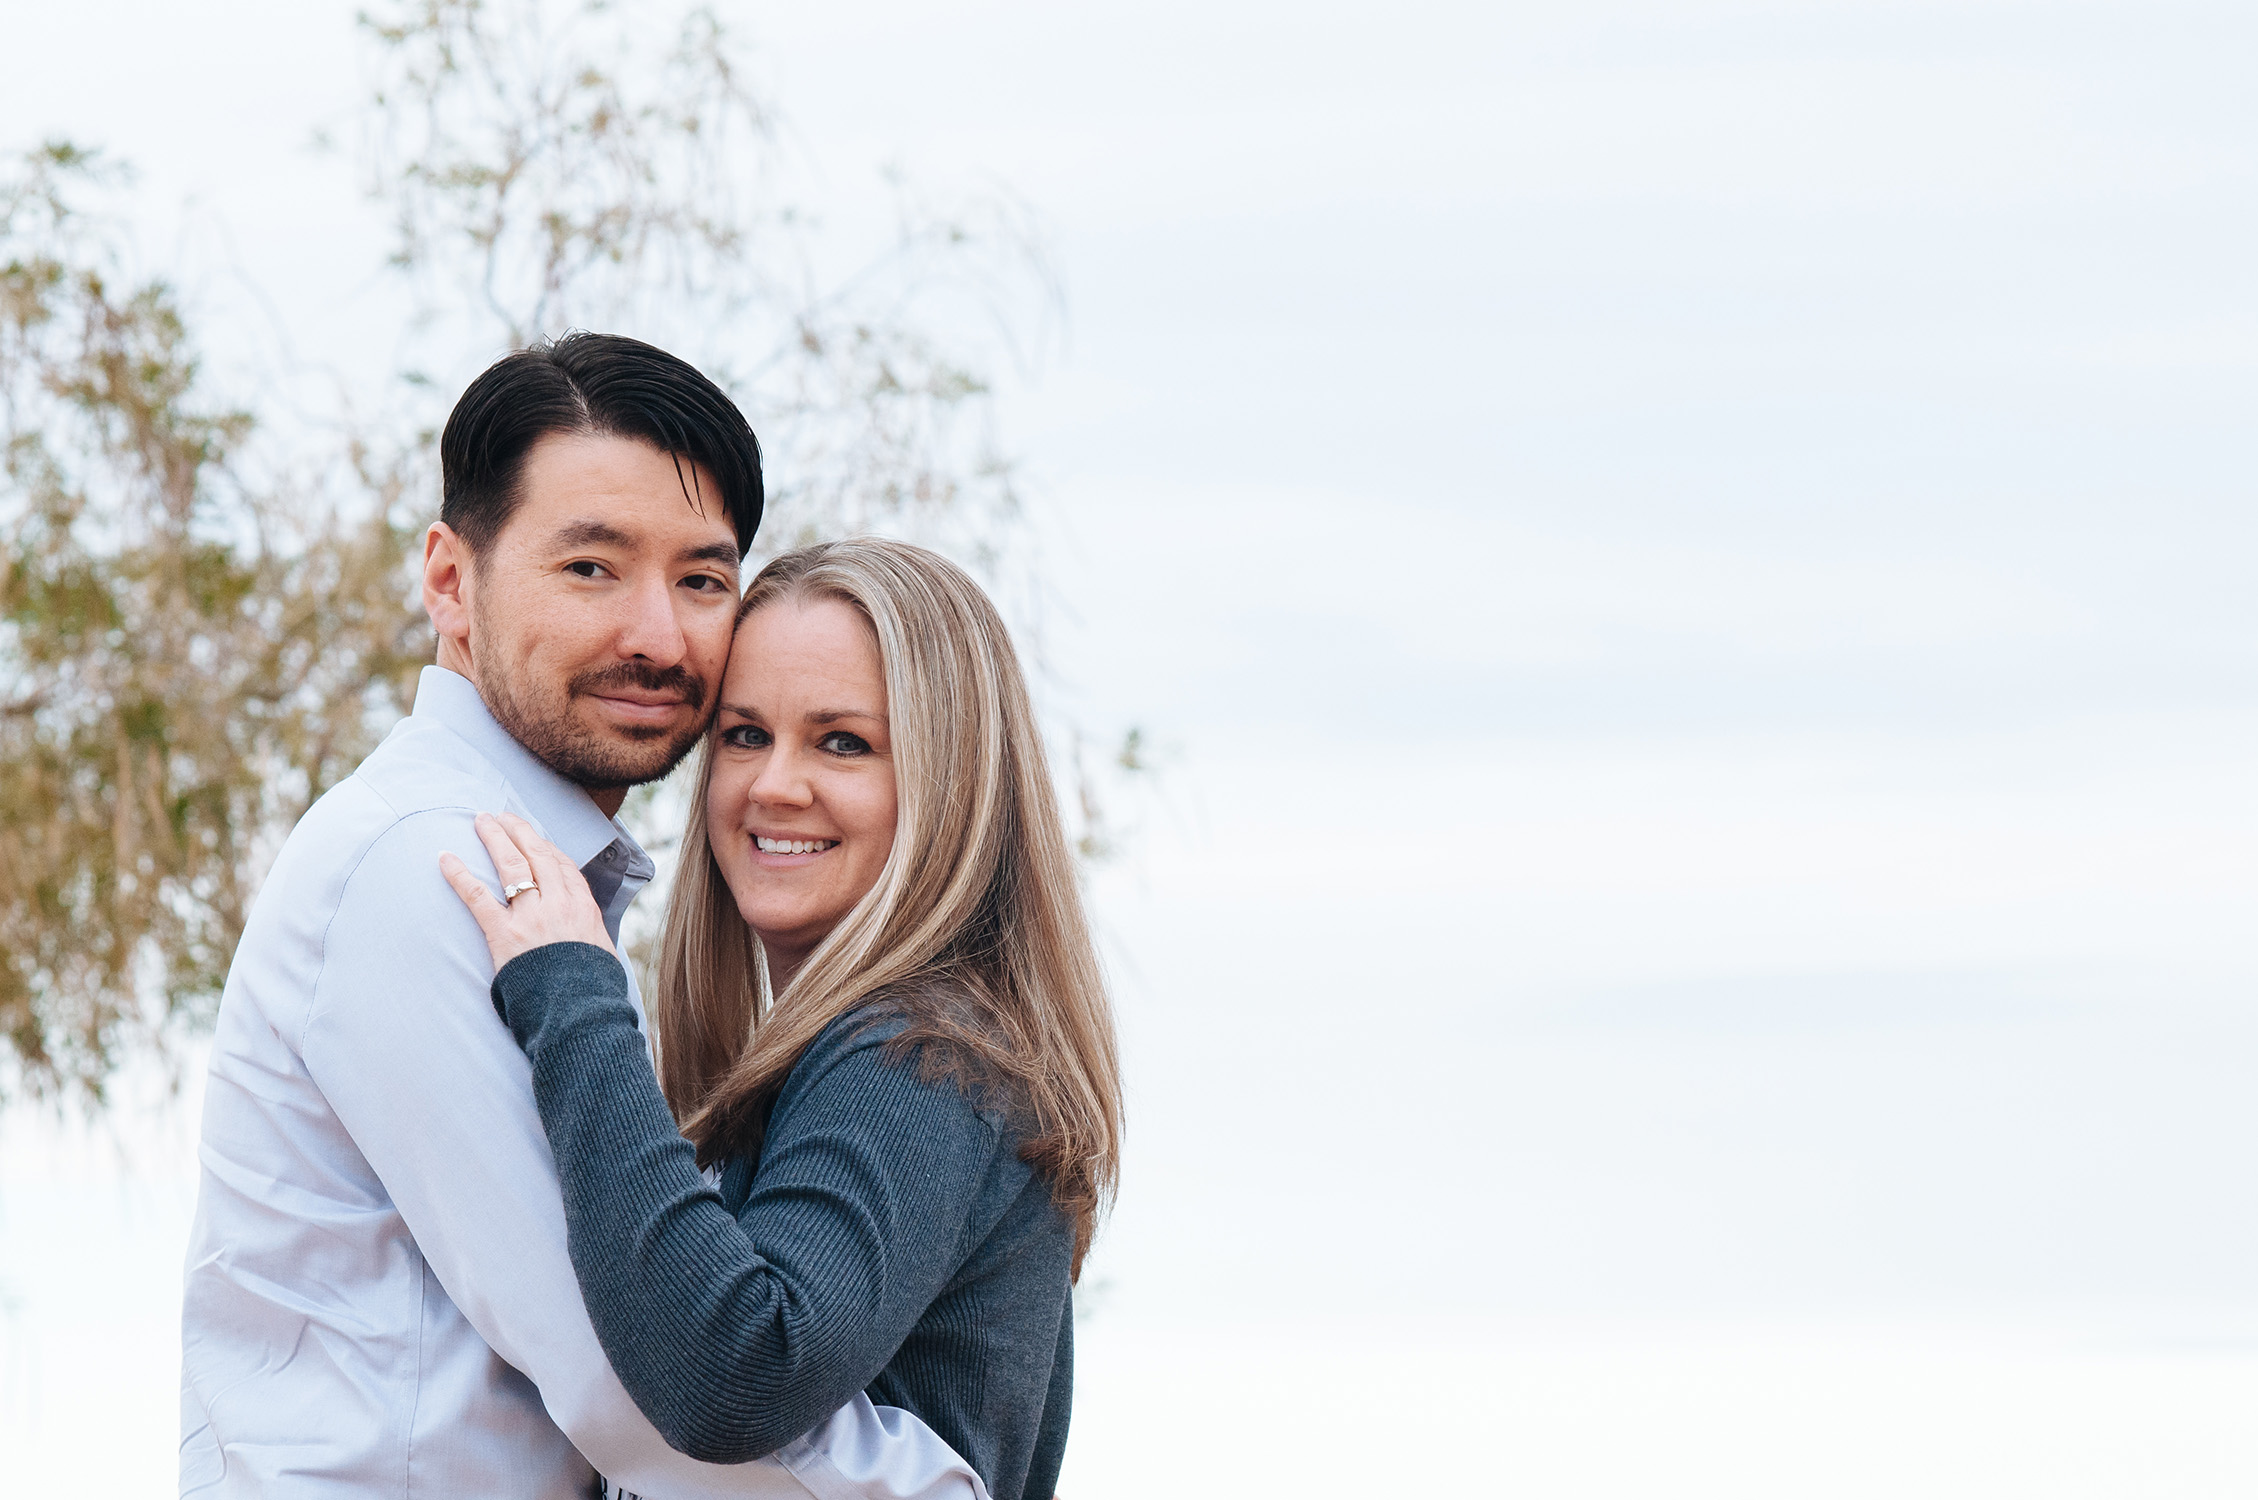 These are not only clients, but family as well. Dana's sister and her fiance needed engagement photographs made a few years ago. We drove to Chandler, Arizona where we photographed them in Downtown Gilbert, AZ. A great area for photographs and for their many bars and restaurants.